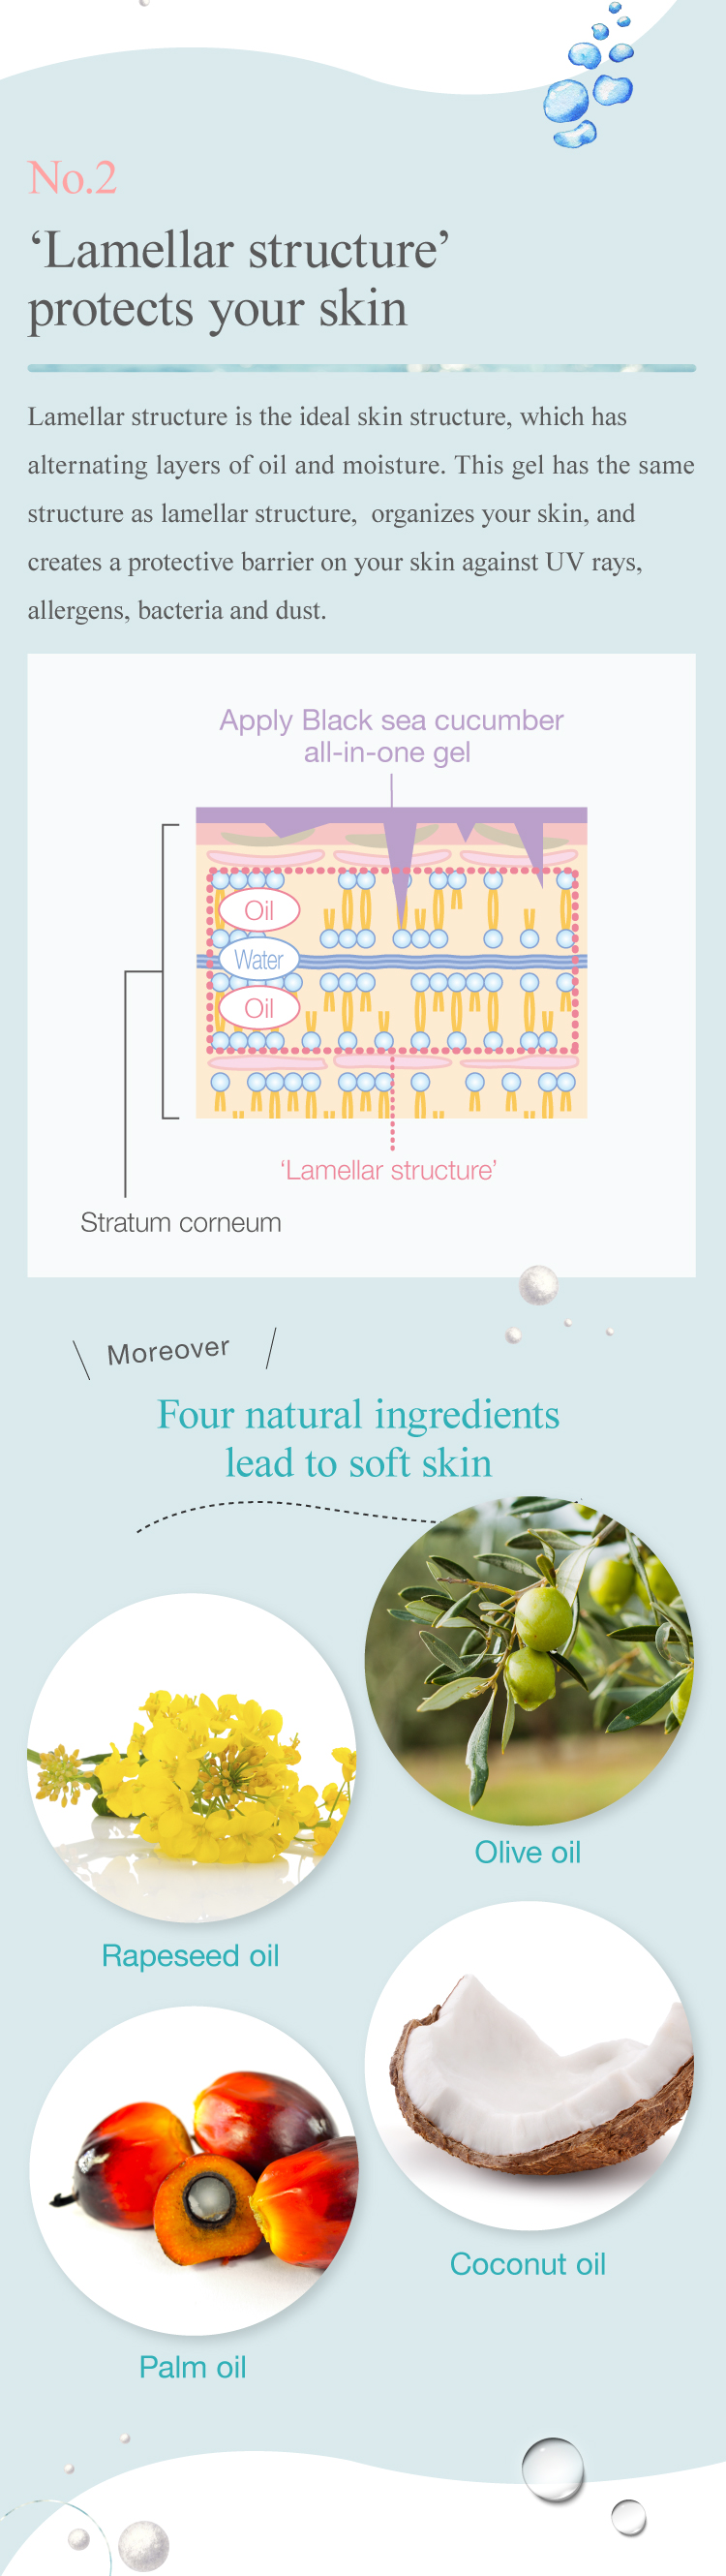 Black sea cucumber all-in-one gel's ‘Lamellar structure’ protects your skin